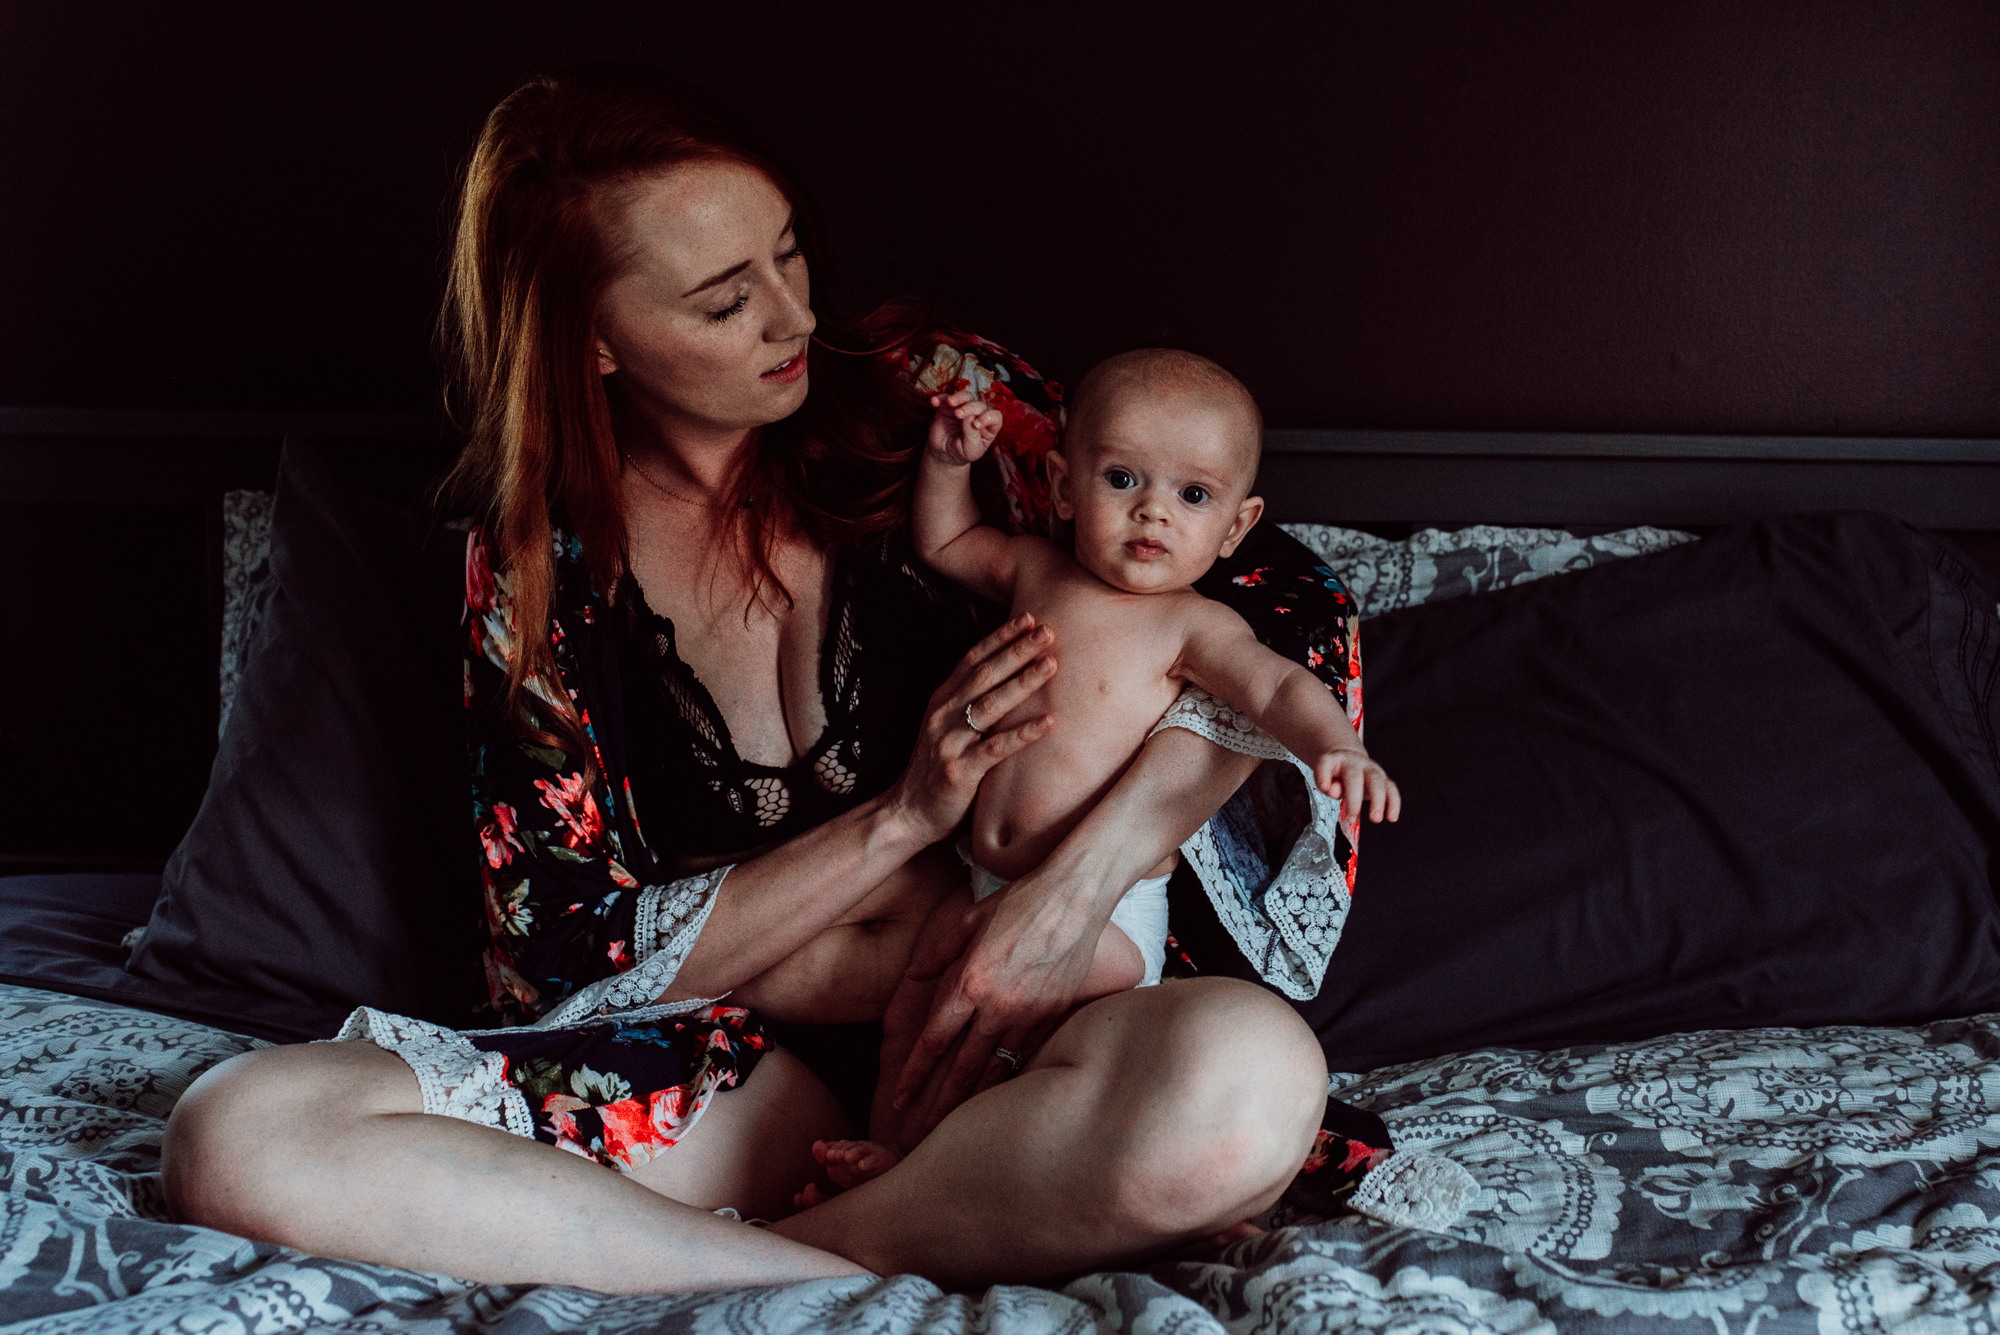 Minneapolis Postpartum Photography by Meredith Westin-May 14, 2019-130446.jpg